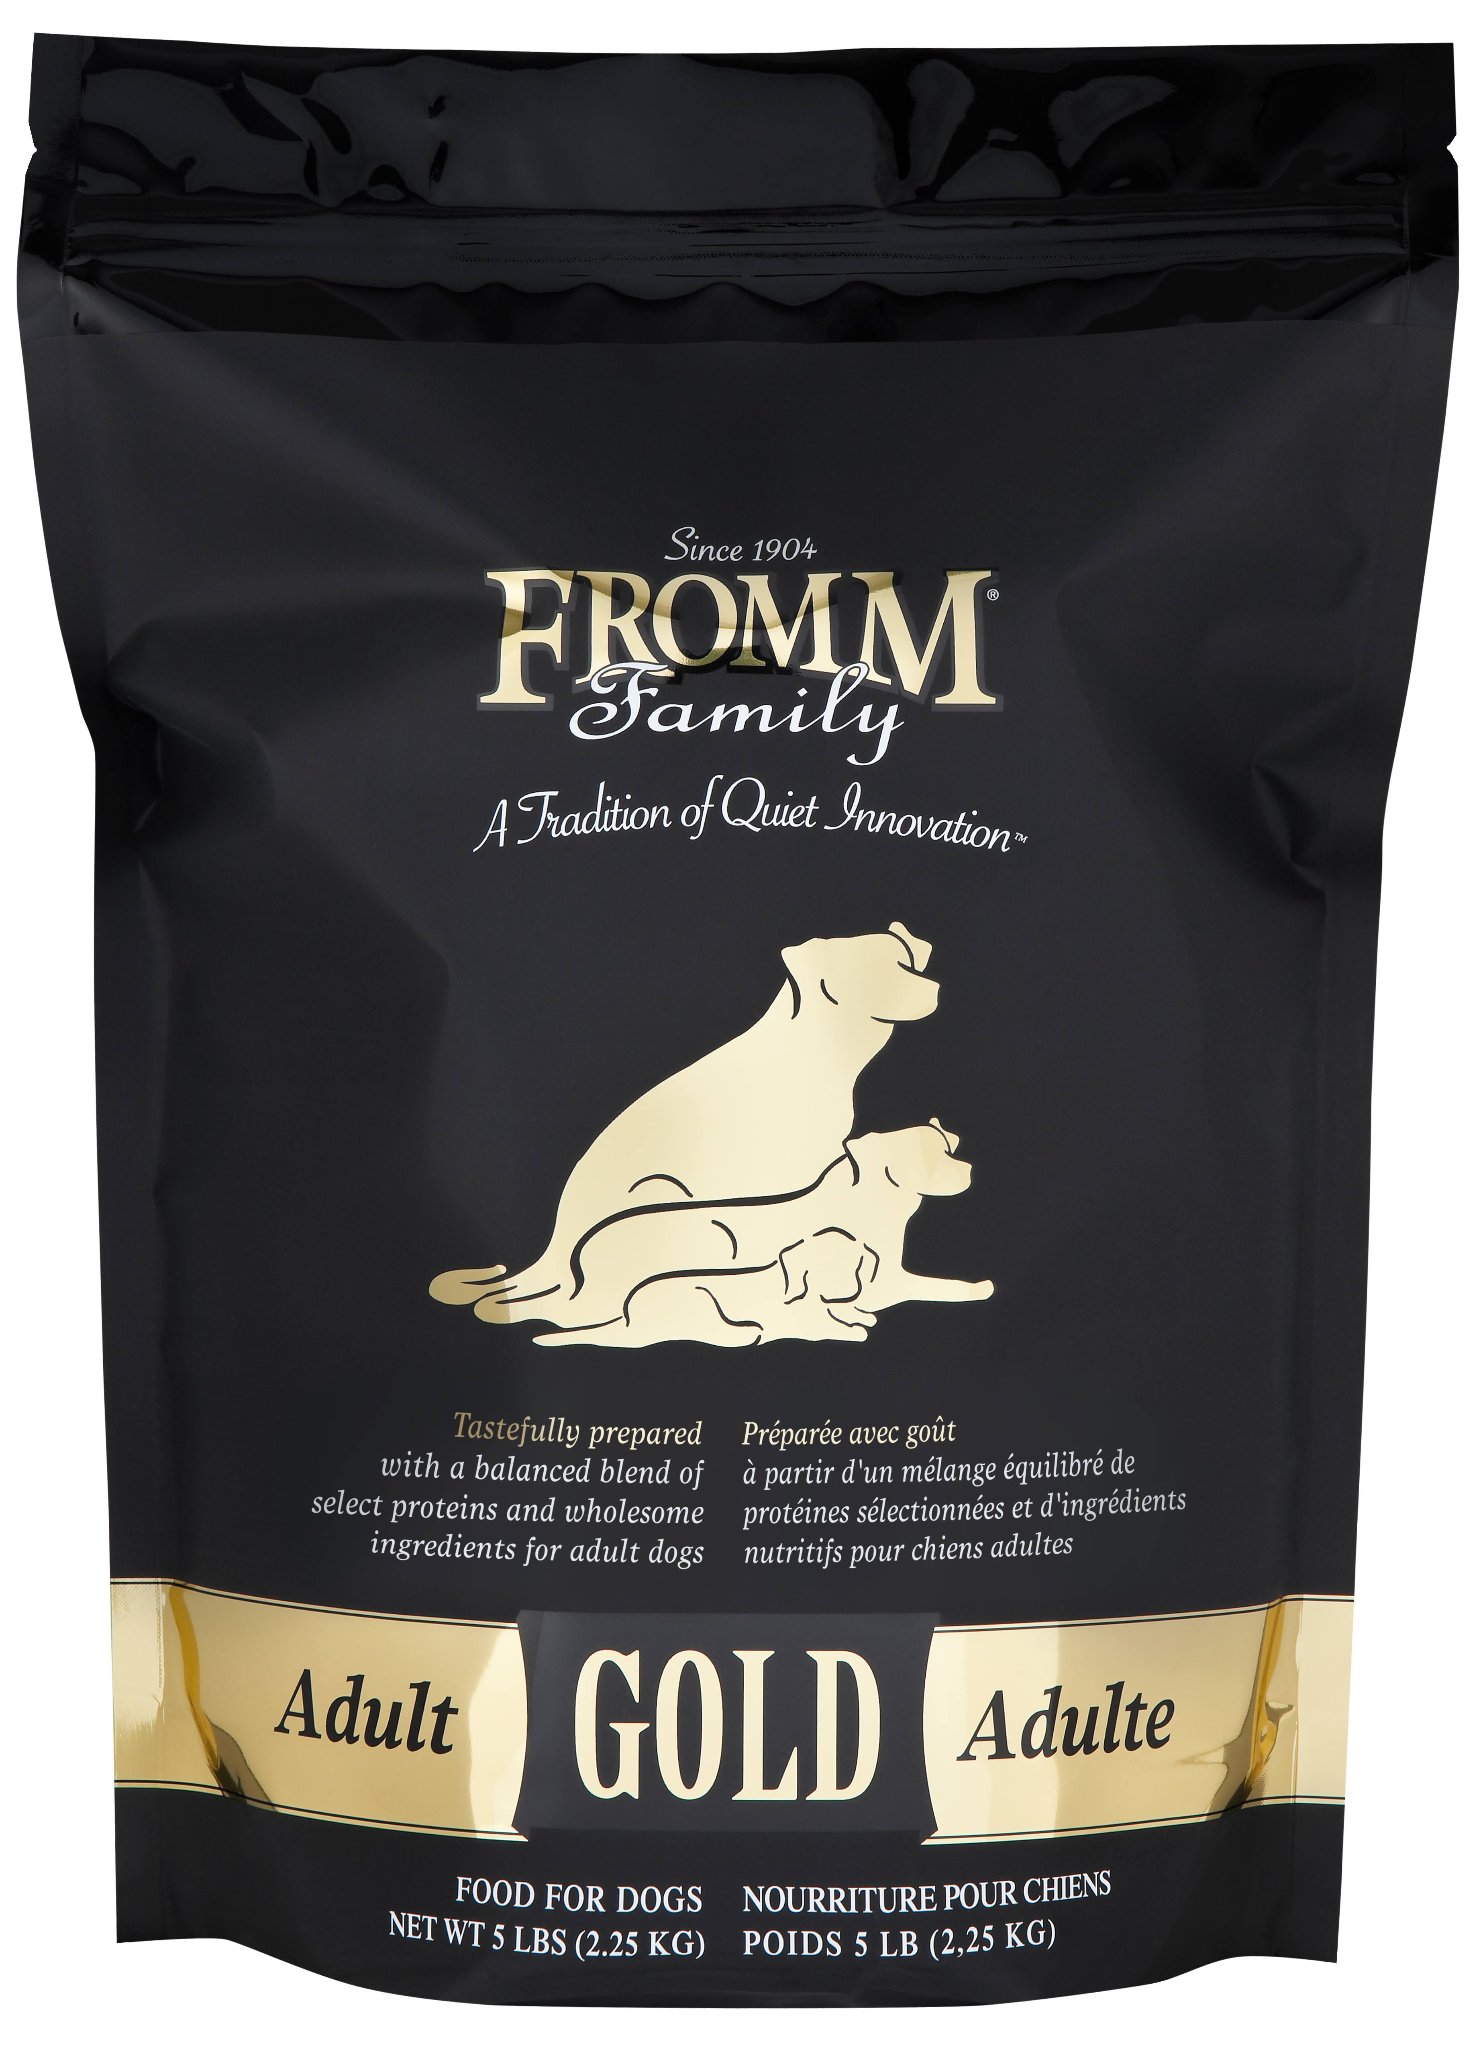 Fromm Dog Food